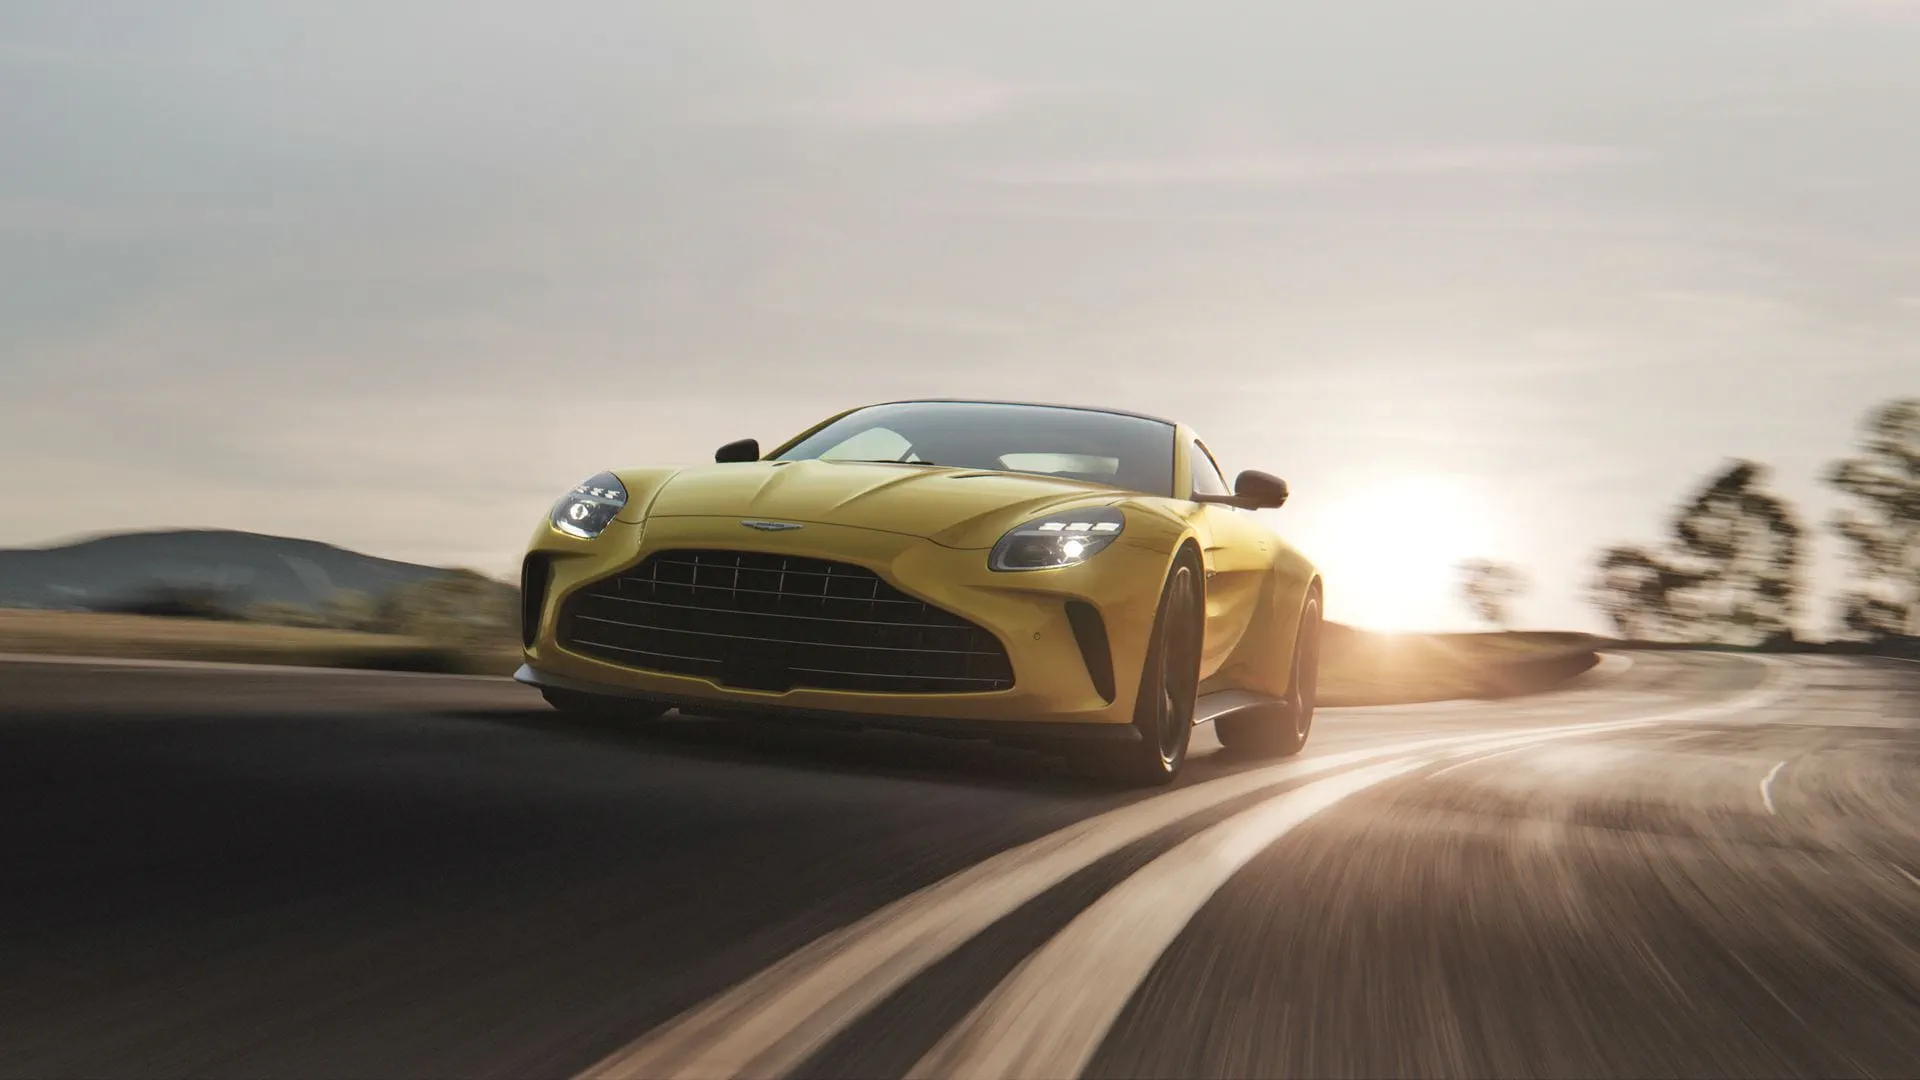 Introducing new Vantage: Engineered for real drivers 